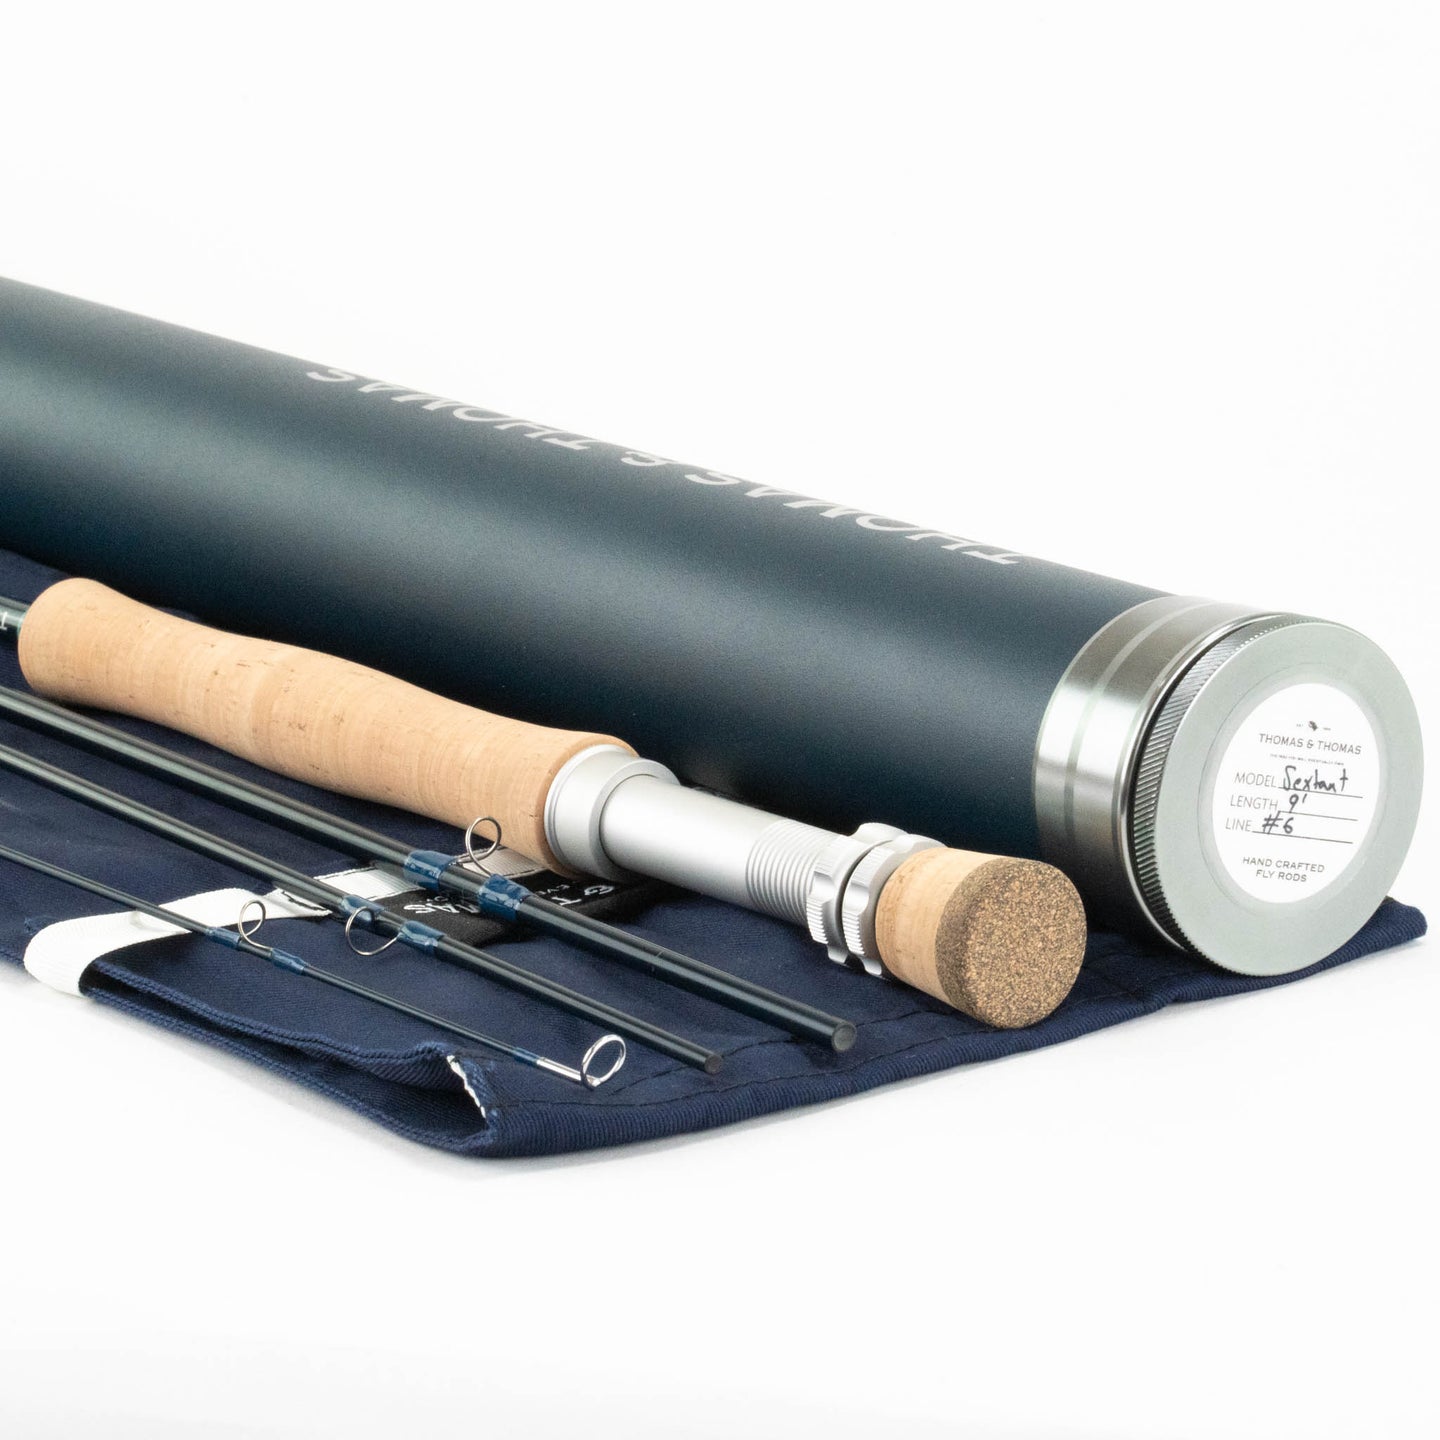 Thomas and Thomas Sextant 690-4 Fly Rod - 6wt 9ft 0in 4pc